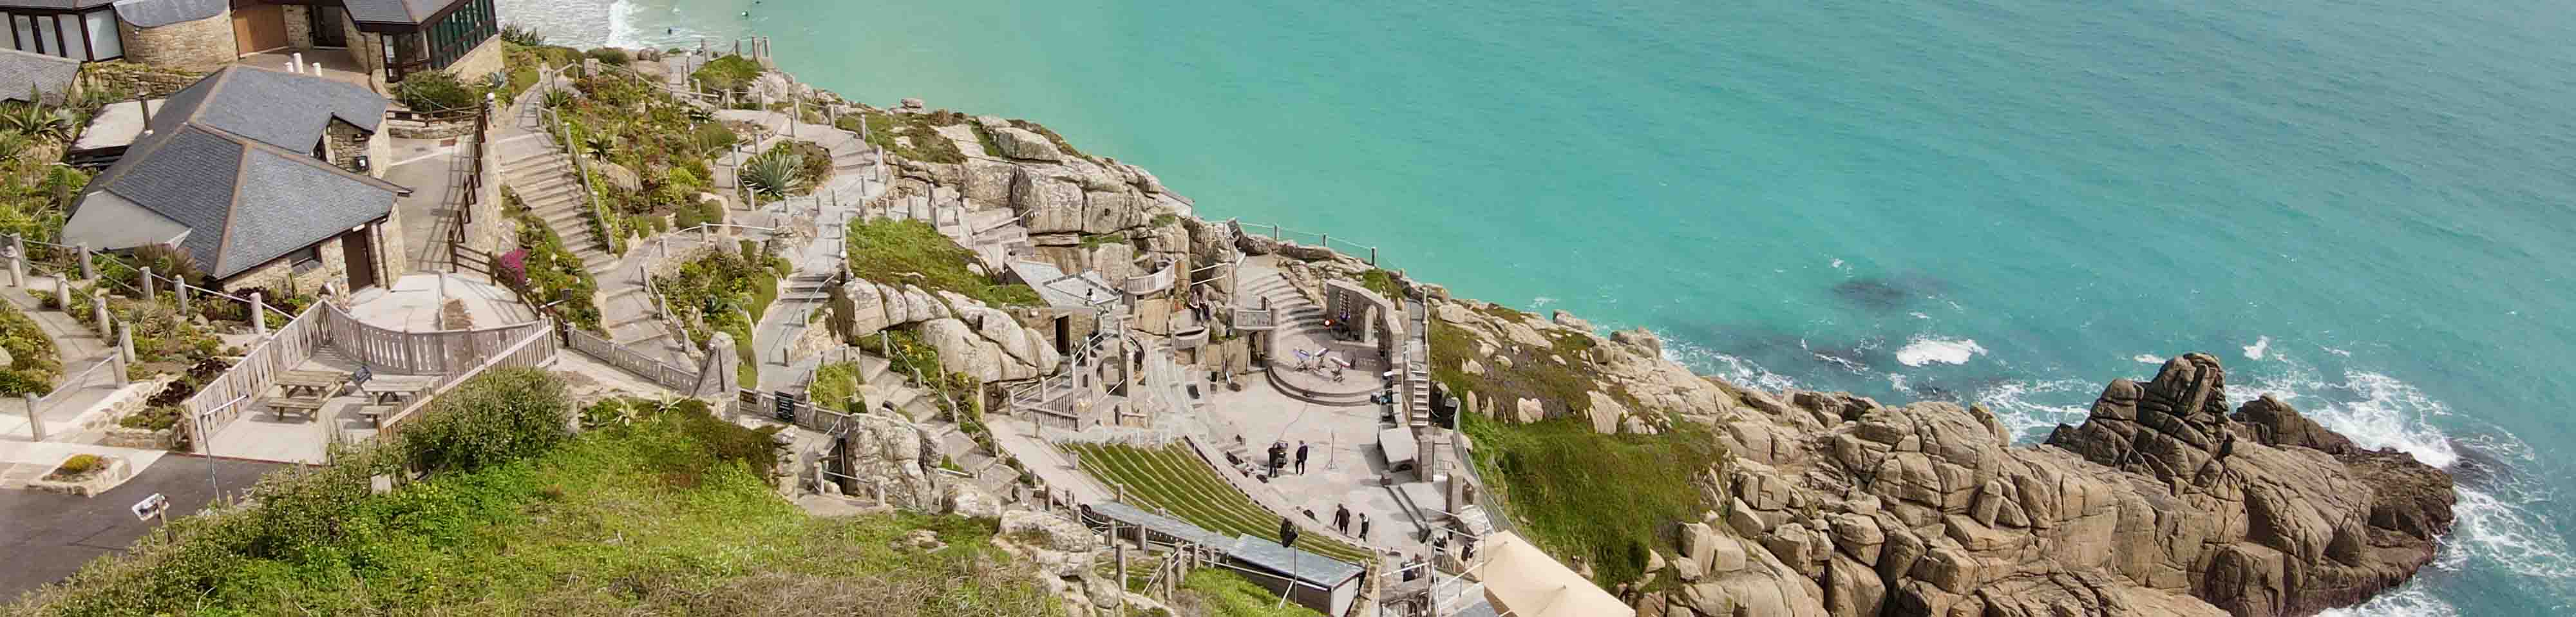 Outdoor theatres in Cornwall